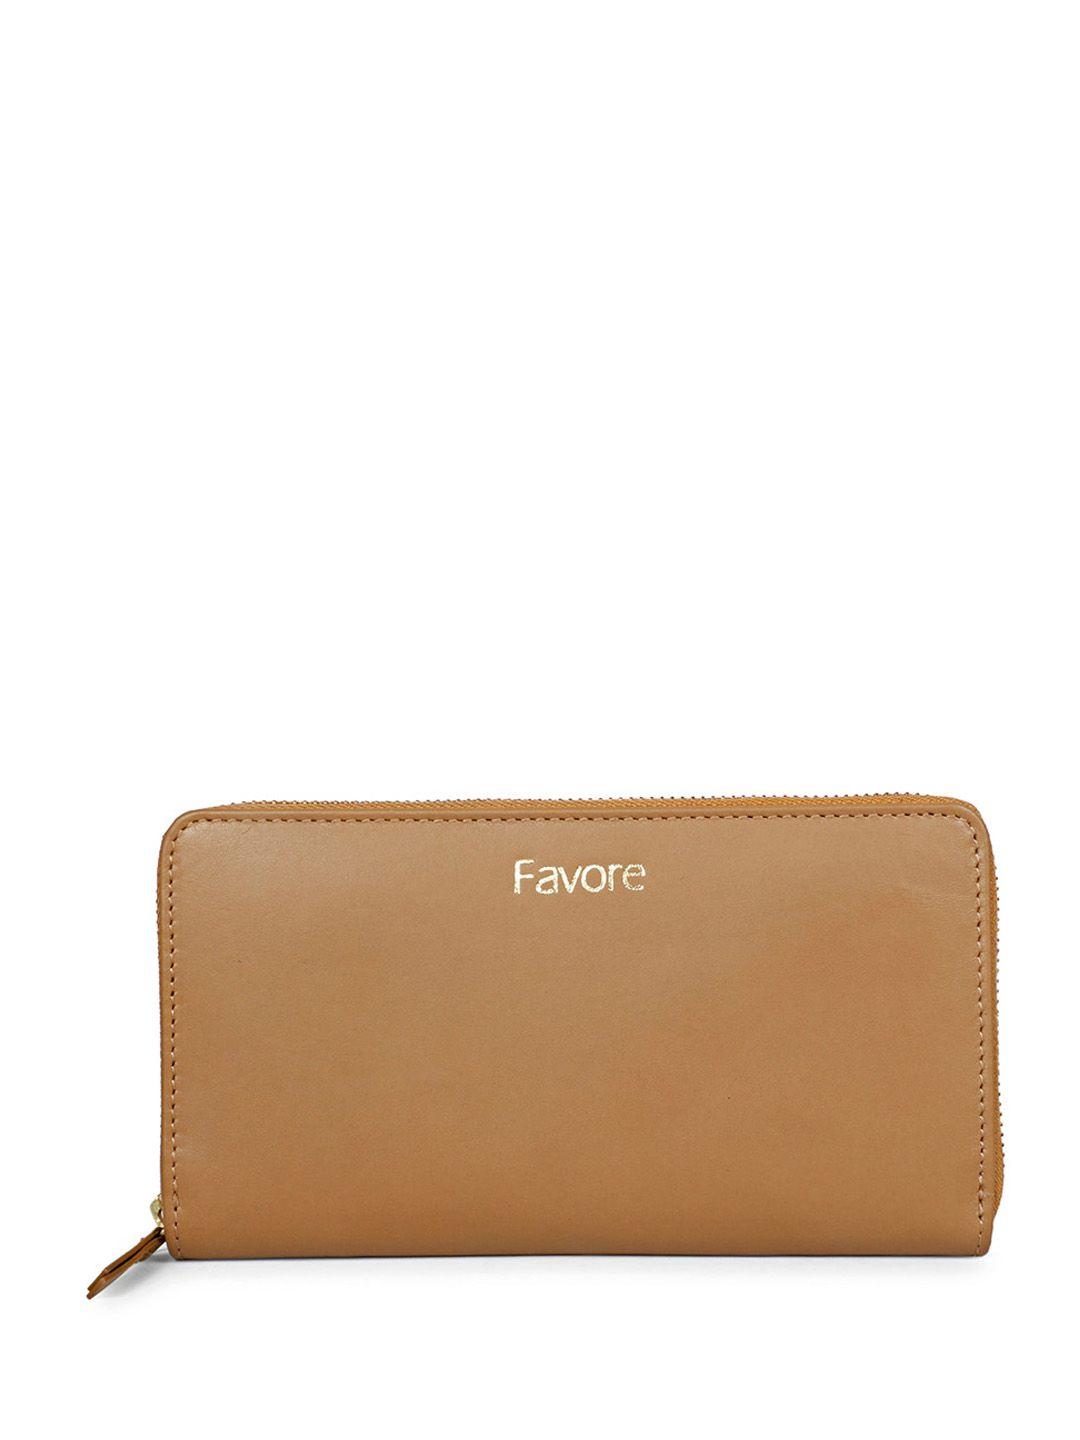 favore leather purse